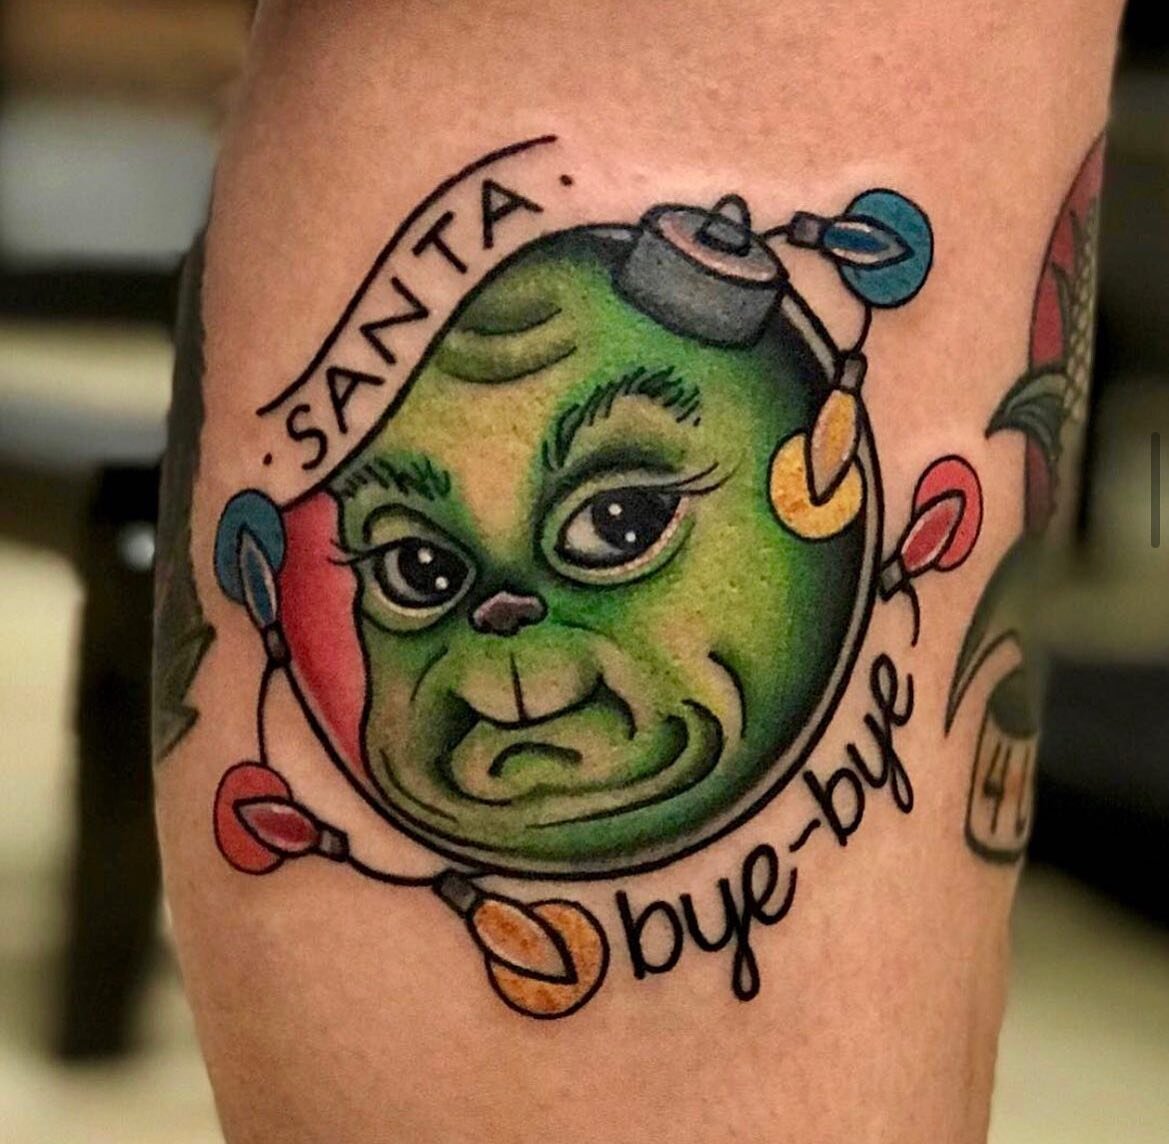 It&rsquo;s not Christmas Eve unless I post my favorite baby Grinch tattoo again, hope everyone has a good day today! We are open until 7 at the shop if anyone wants to stop by or get a baby grinch of their own!! #babygrinch #santabyebye #grinchmas #g